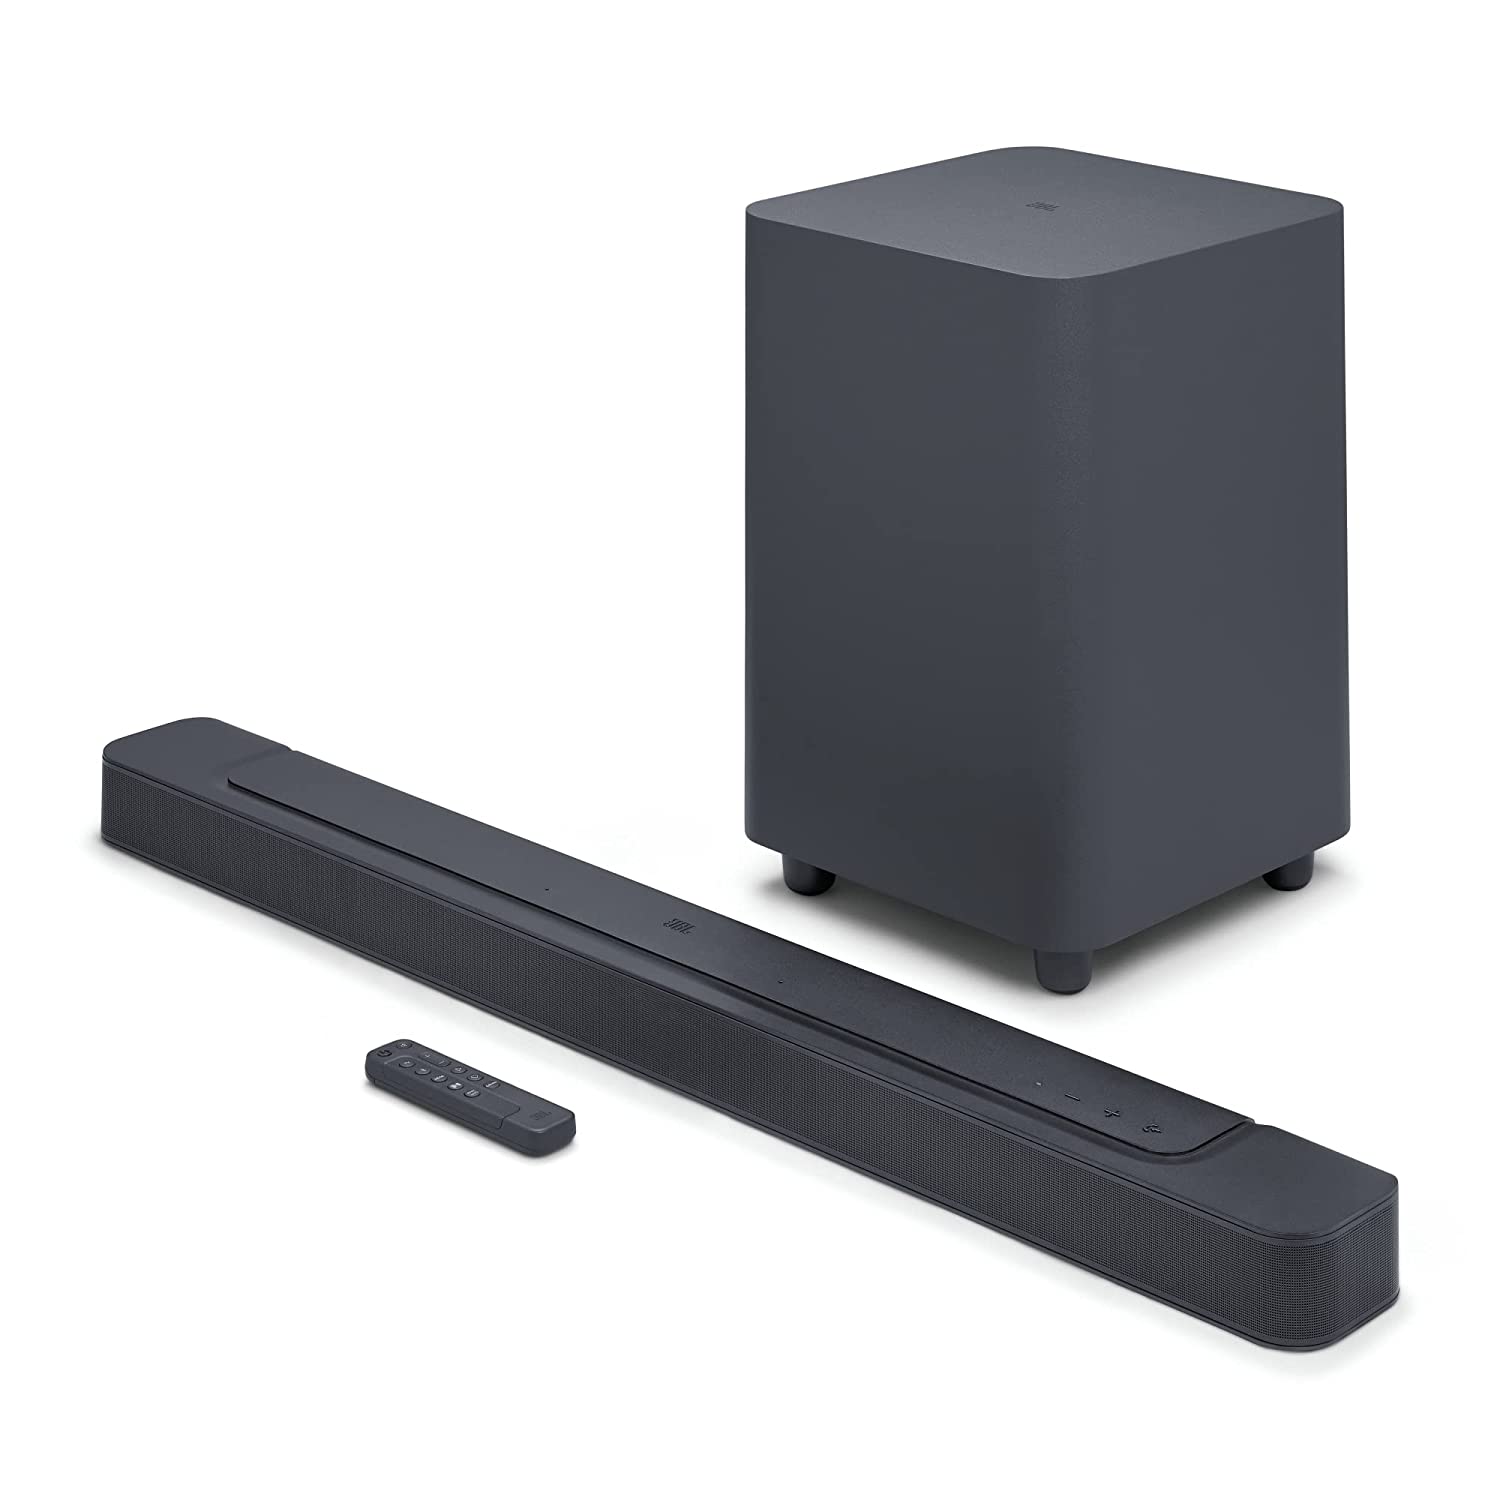 JBL Bar 500 Pro Dolby Atmos® Soundbar with Wireless Subwoofer, 5.1 Channel, 3D Surround, Multibeam™, HDMI eARC with 4K Dolby Vision Pass-Through, One App, Bluetooth, Wi-Fi & Optical Input (590W)